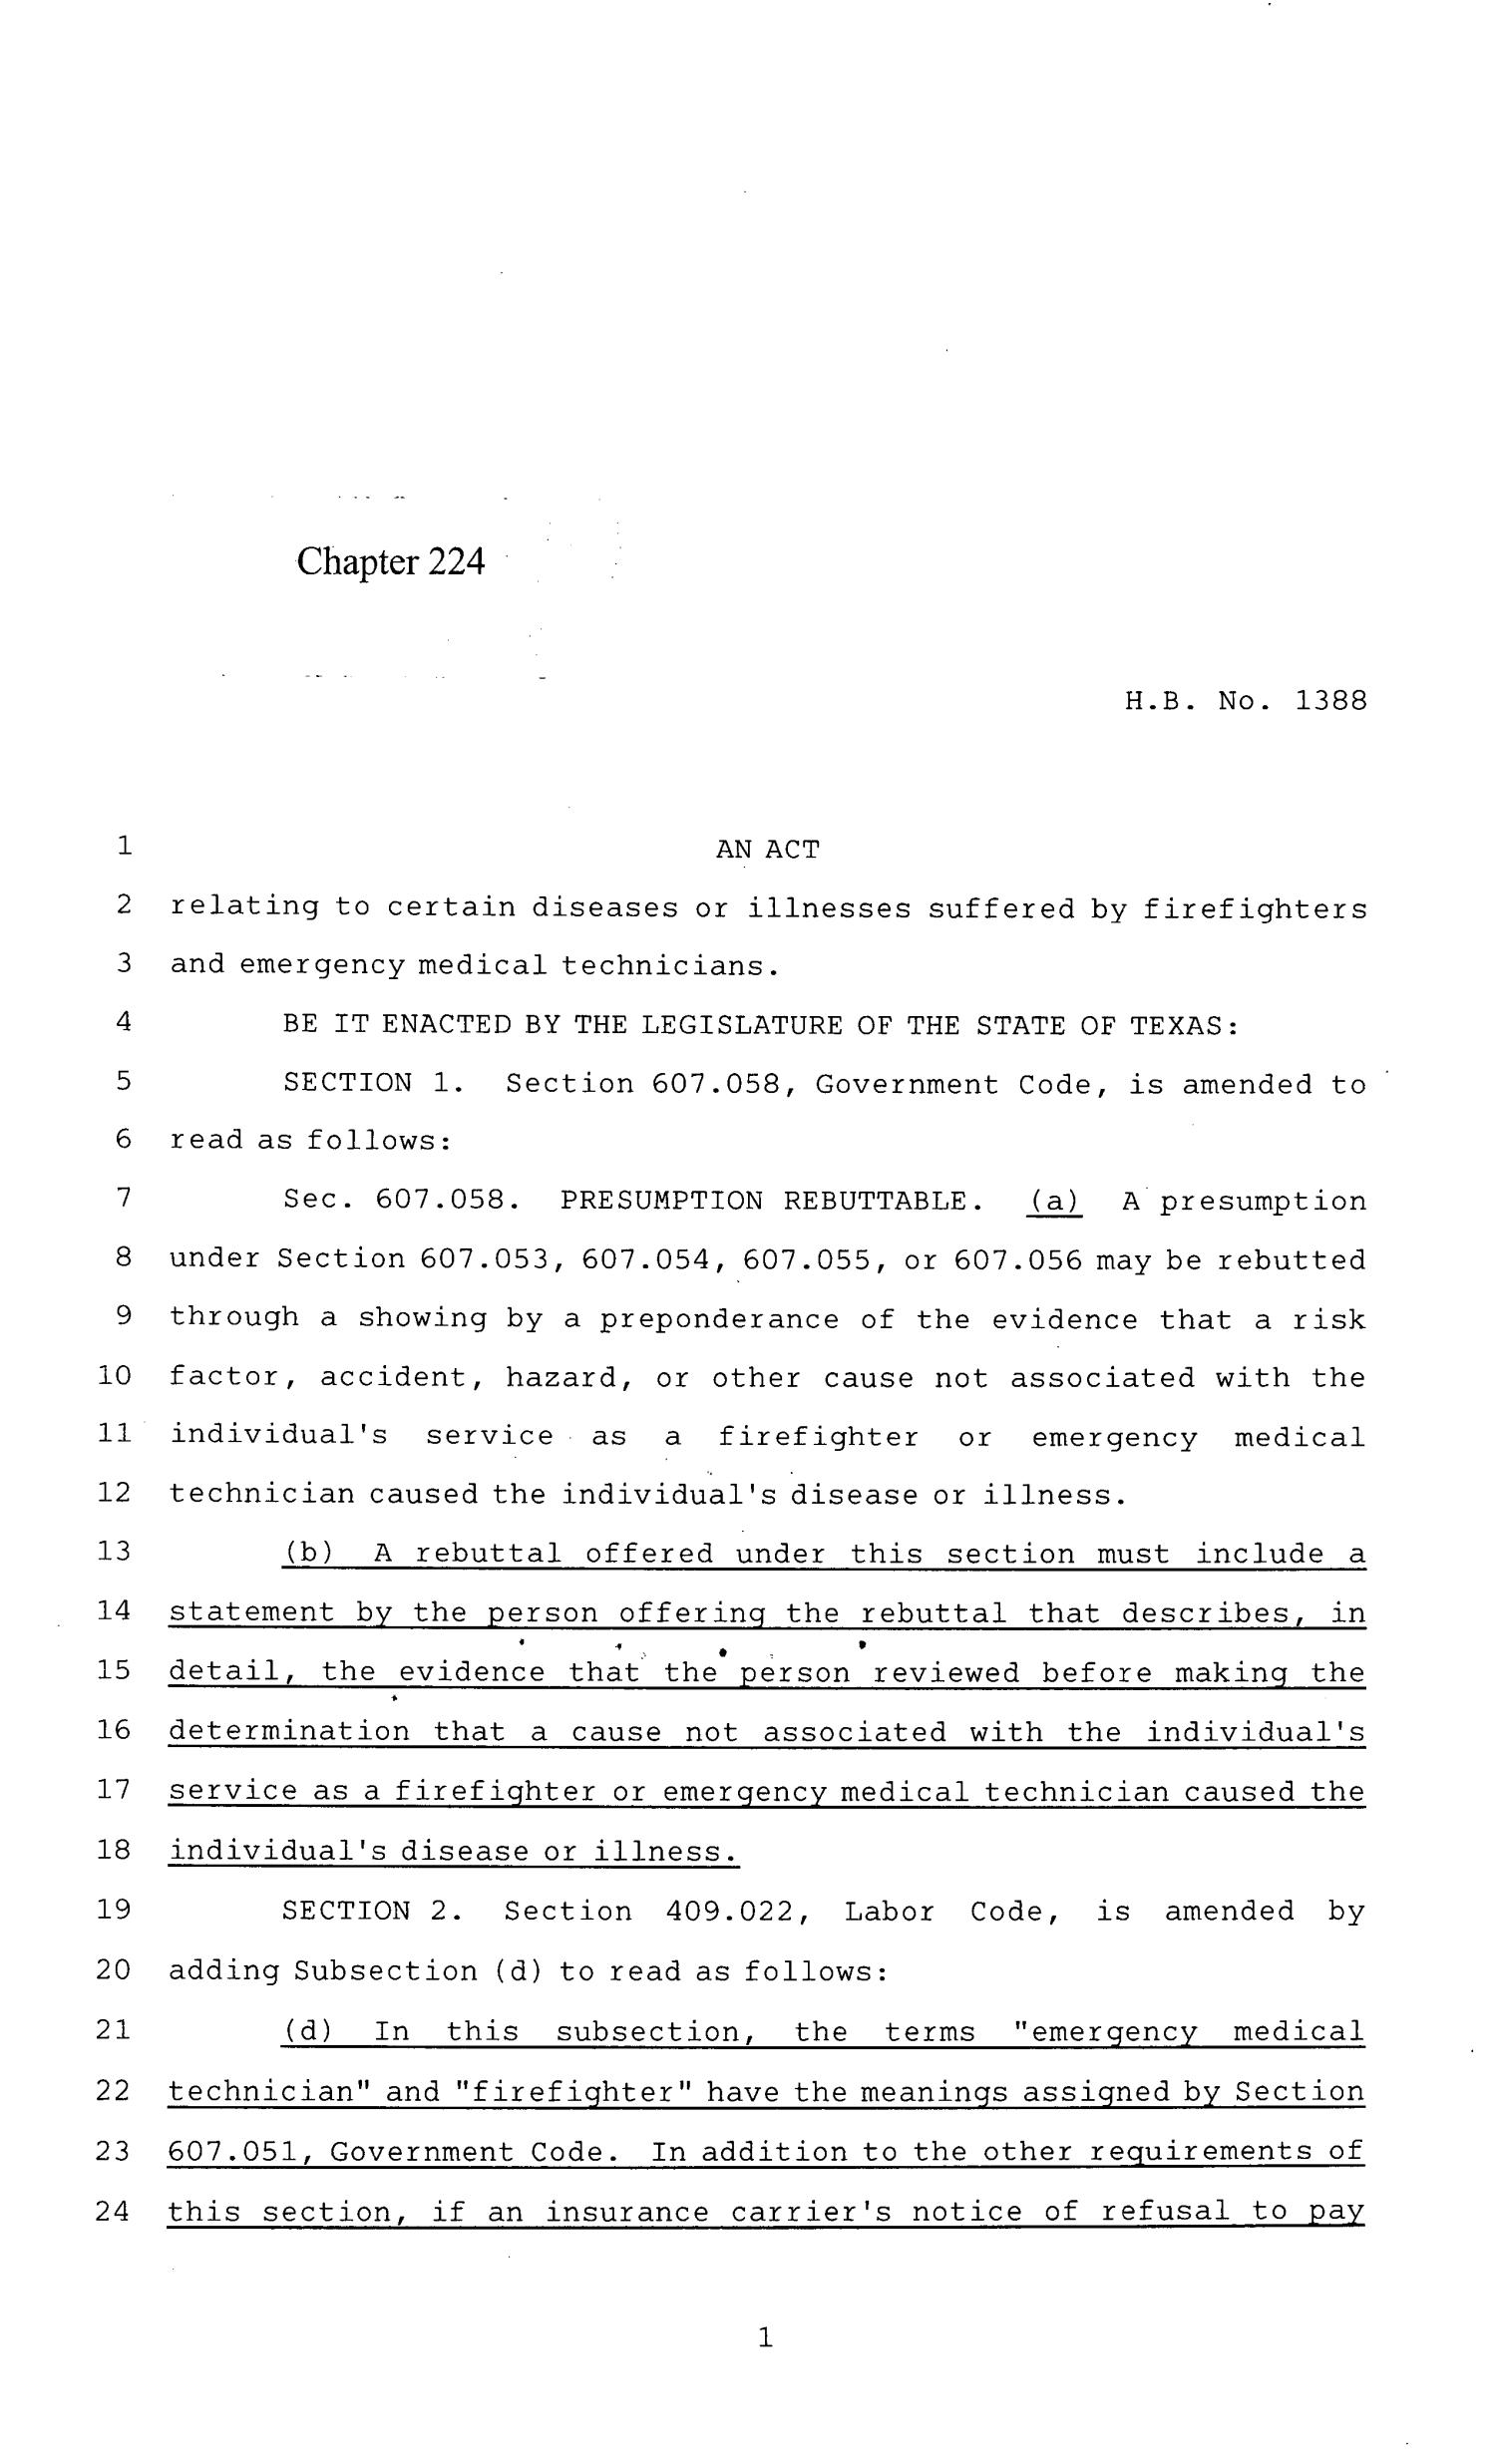 84th Texas Legislature, Regular Session, House Bill 1388, Chapter 224
                                                
                                                    [Sequence #]: 1 of 8
                                                